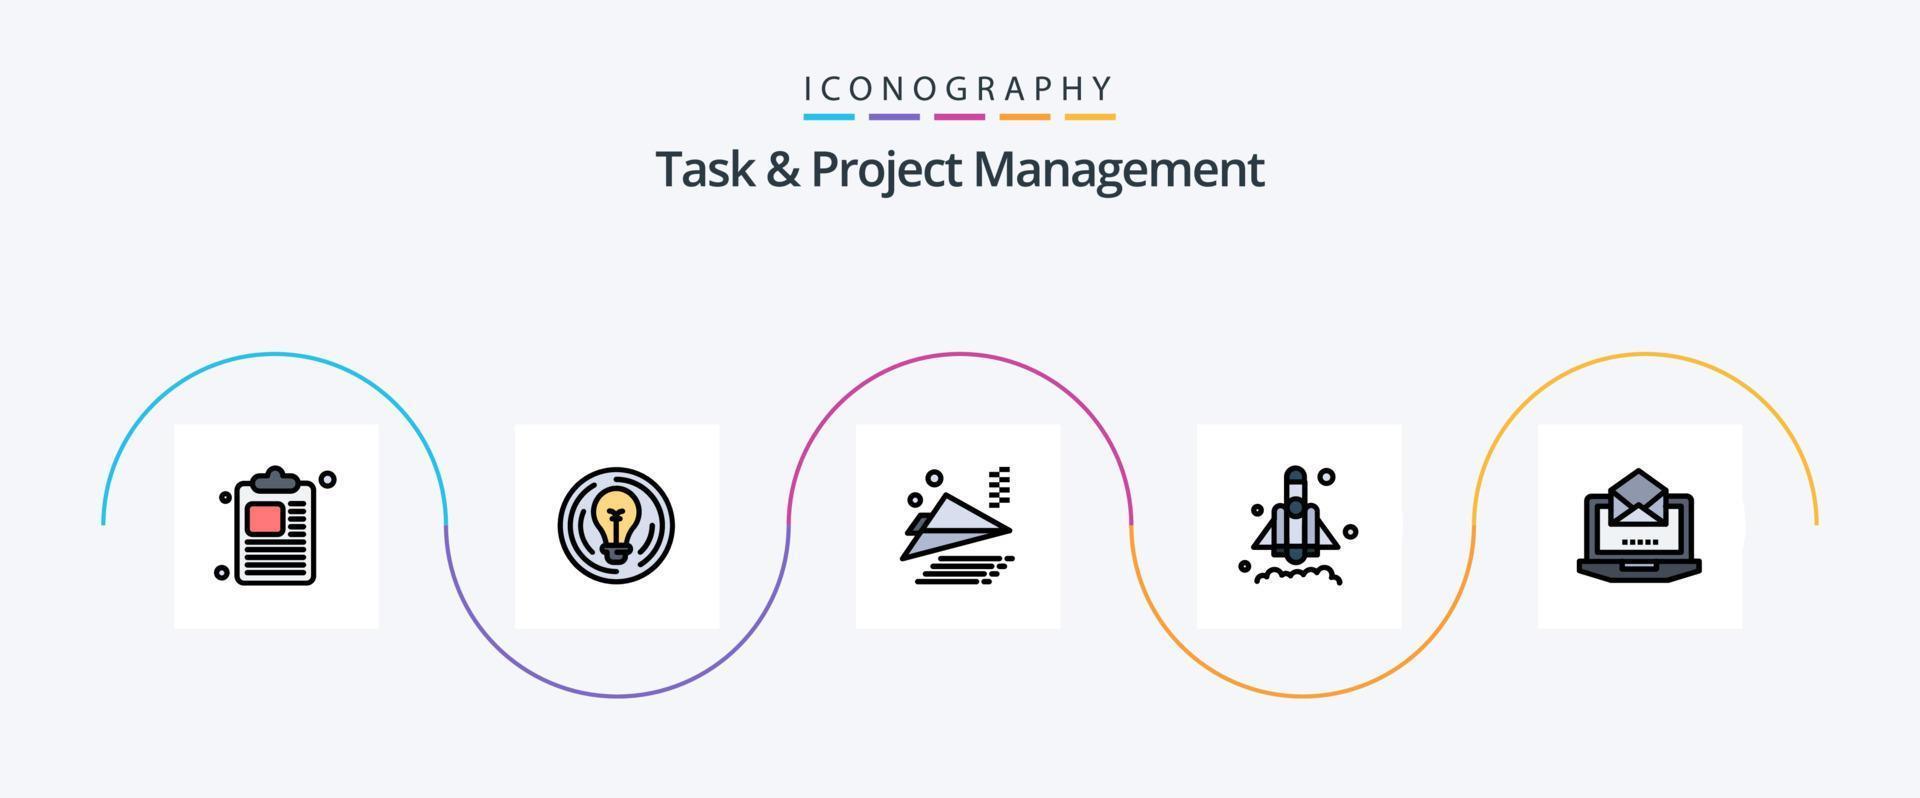 Task And Project Management Line Filled Flat 5 Icon Pack Including open. laptop. airplane. server. rocket vector